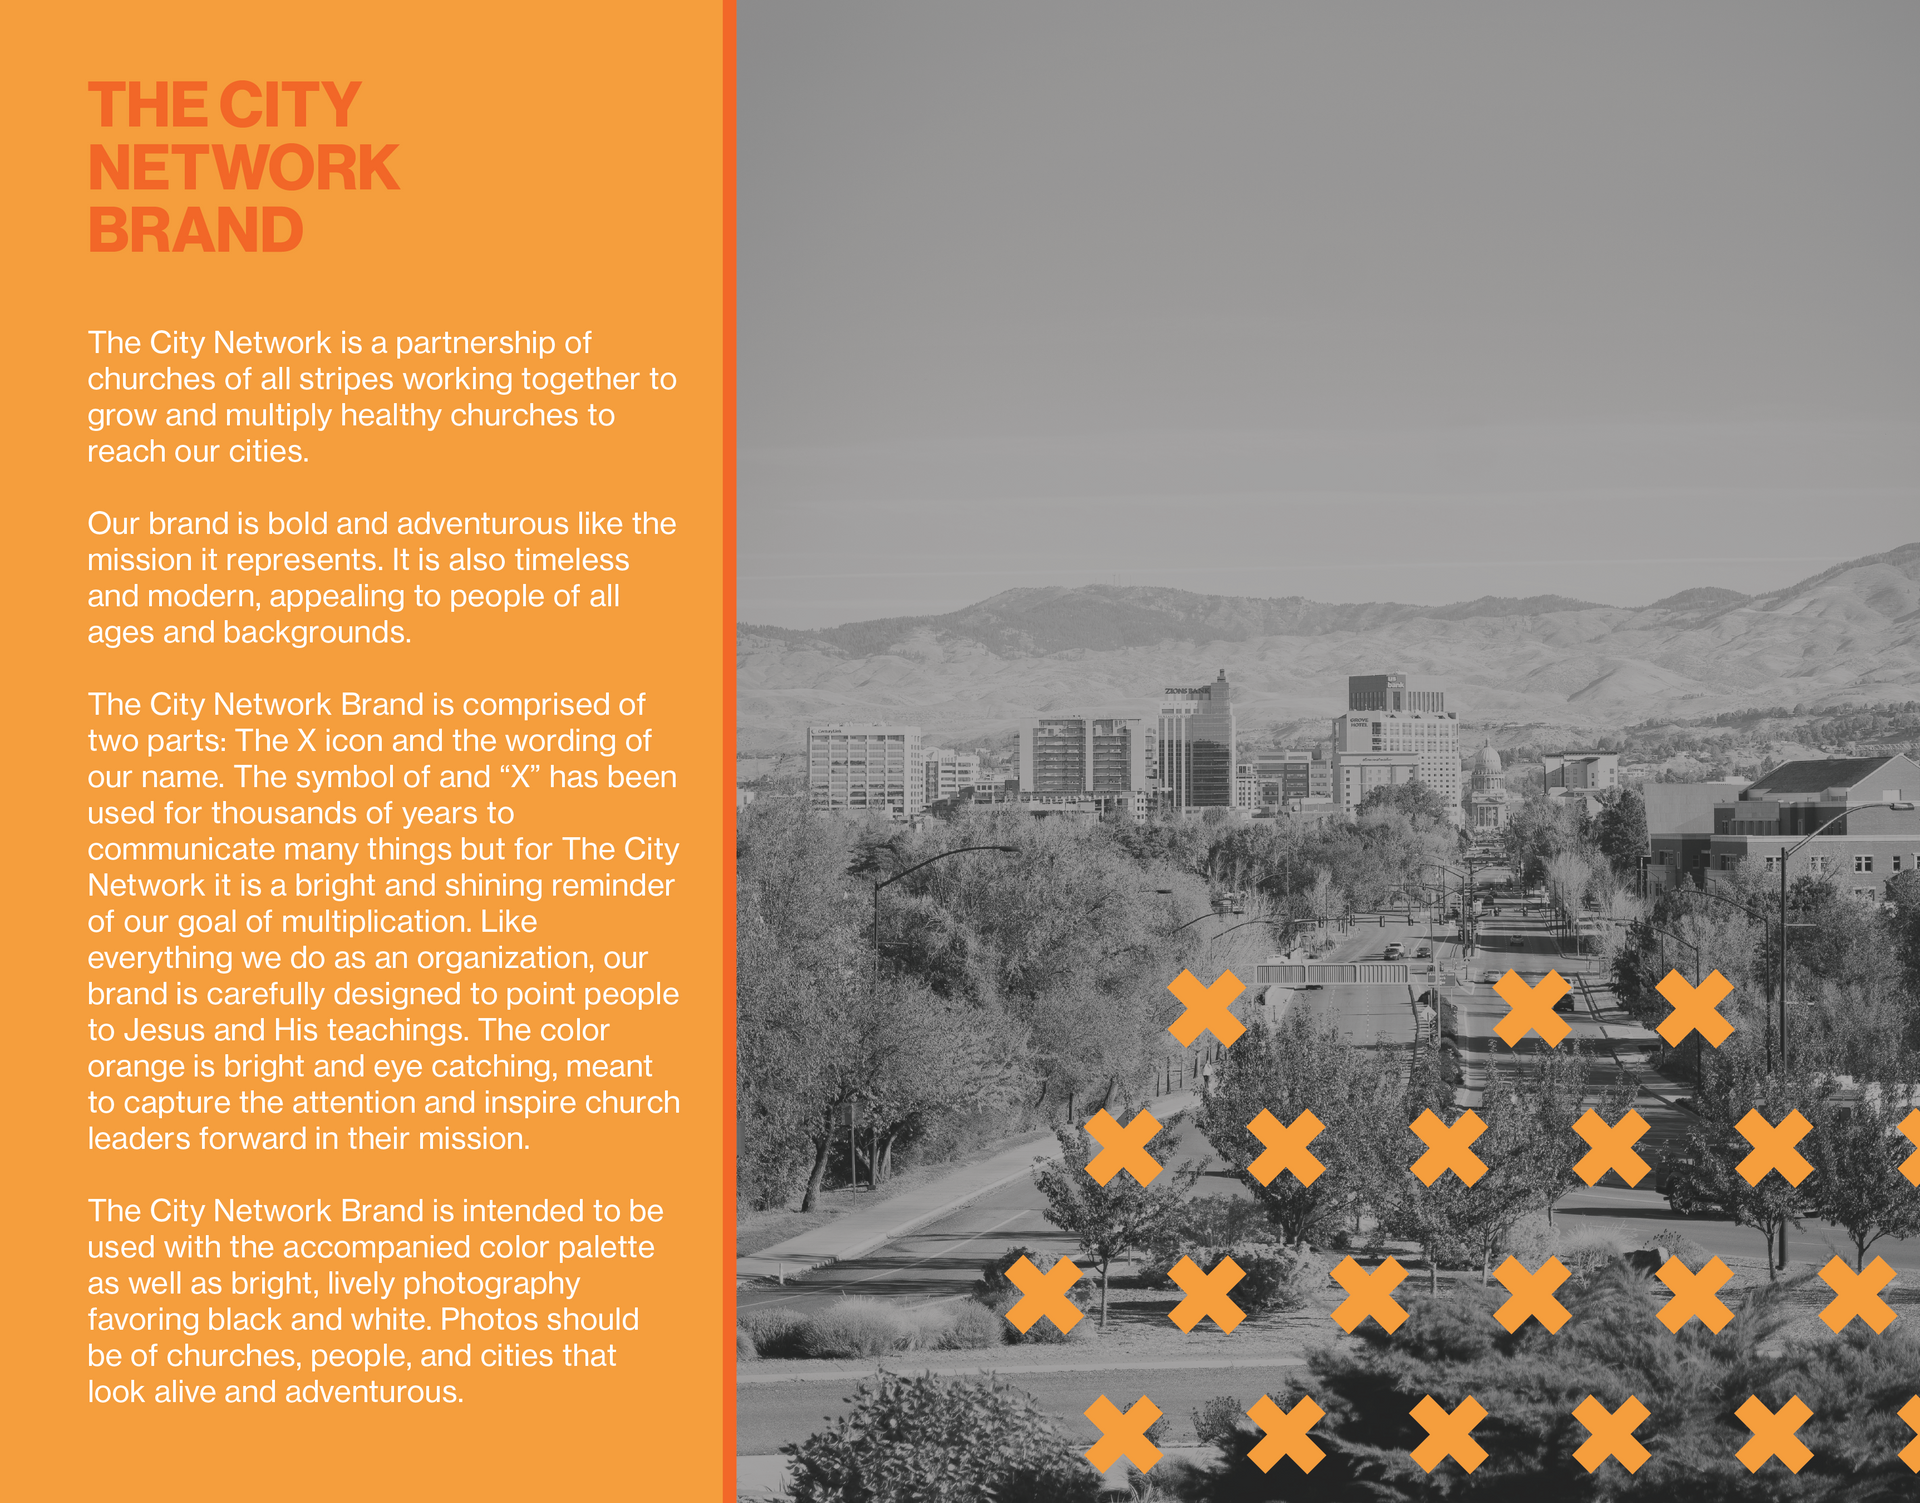 An advertisement for the city network brand with a picture of a city